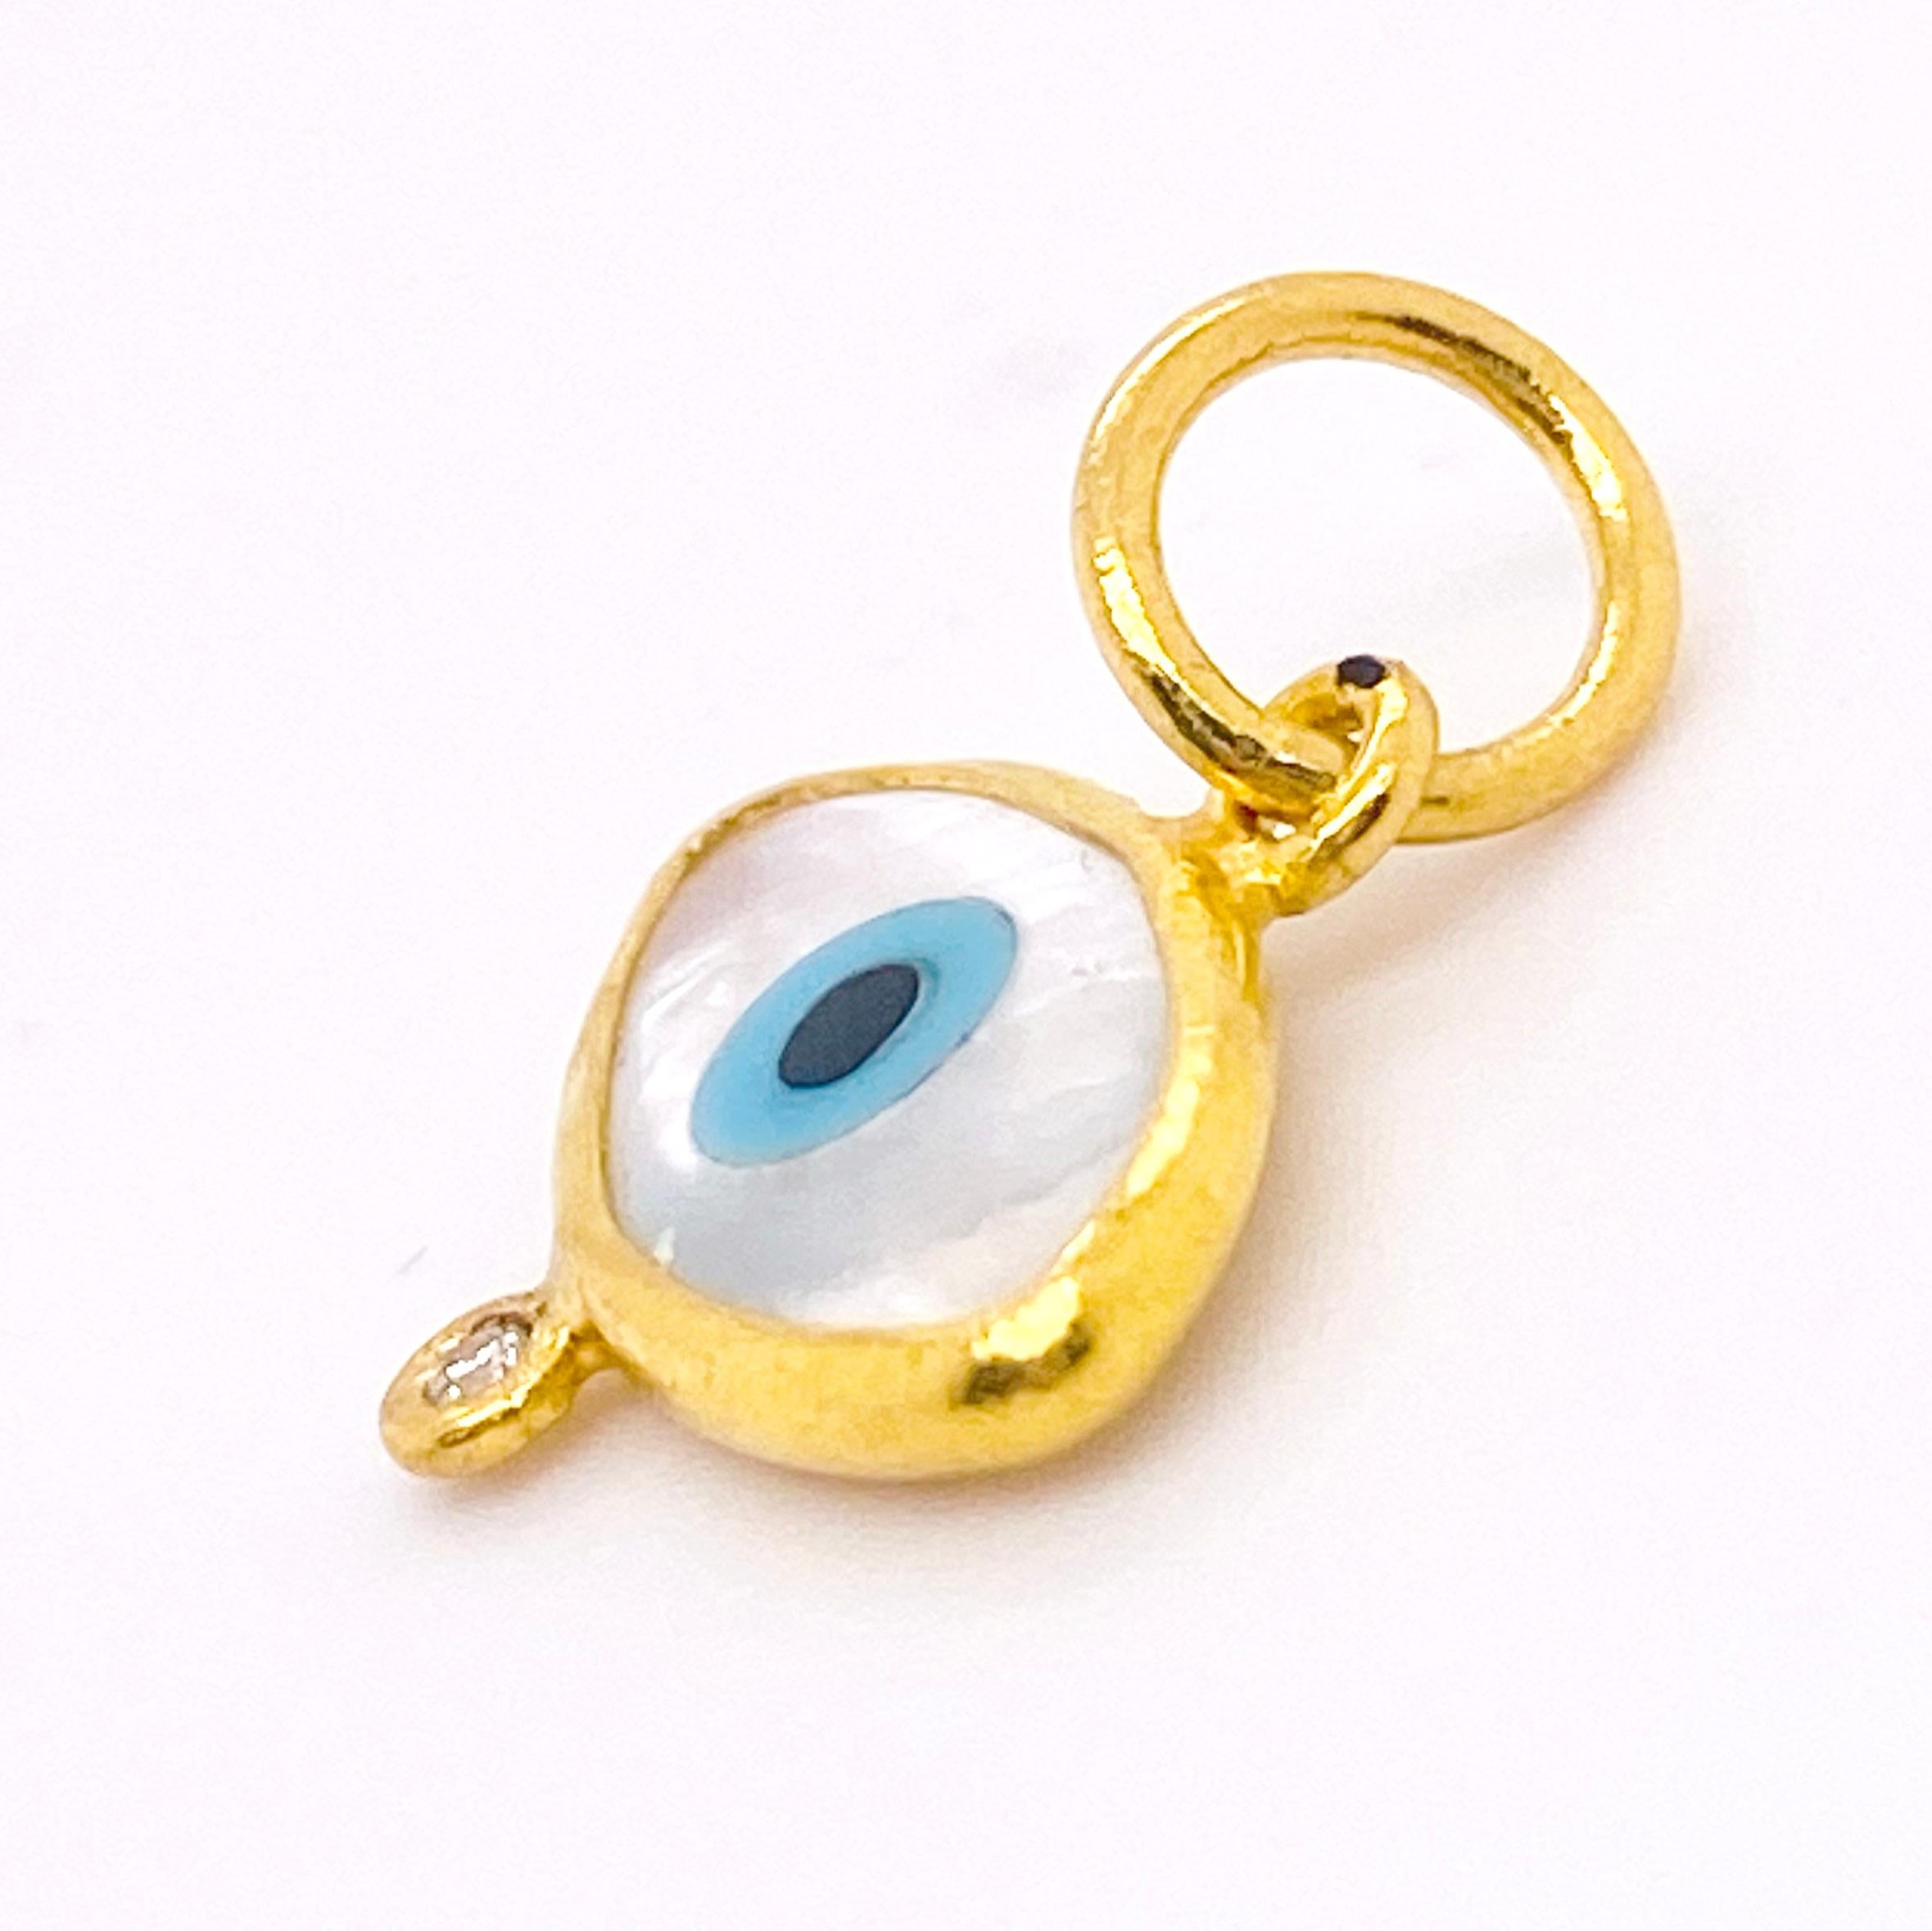 The evil eye will protect you from all evil! Made in solid 24 karat gold with genuine mother-of-pearl with a bezel set, genuine, natural diamond. This charm is large enough to wear as a pendant or small enough for a charm bracelet. The details for